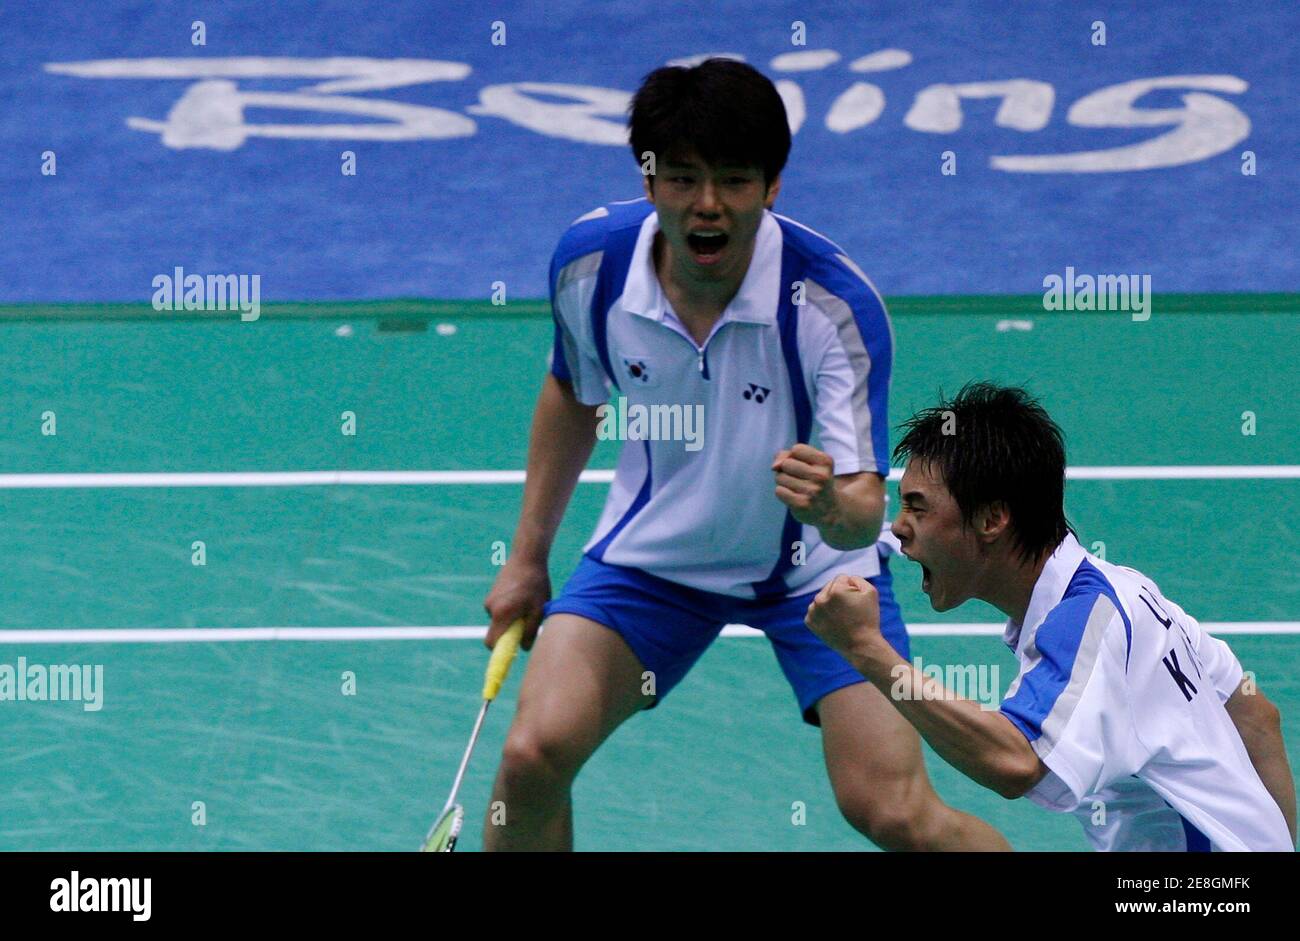 Lee Jaejin (R) and Hwang Jiman of South Korea celebrate after winning their men's doubles bronze medal badminton match against Jonas Rasmussen and Lars Paaske of Denmark at the Beijing 2008 Olympic Games, August 16, 2008.     REUTERS/Beawiharta (CHINA) Stock Photo